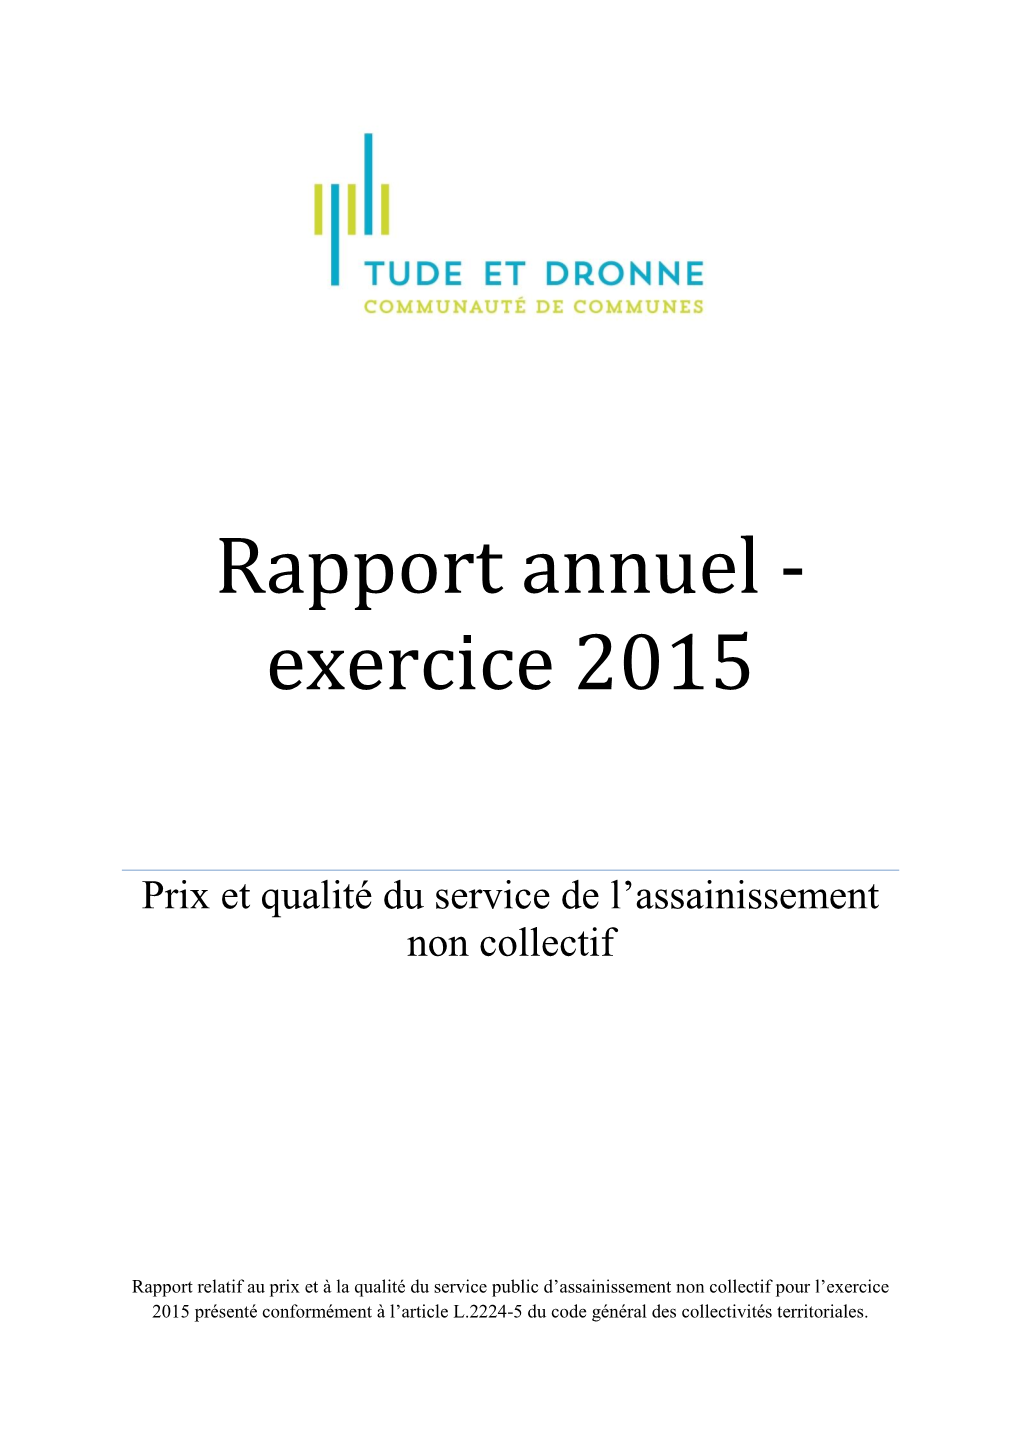 Rapport Annuel - Exercice 2015